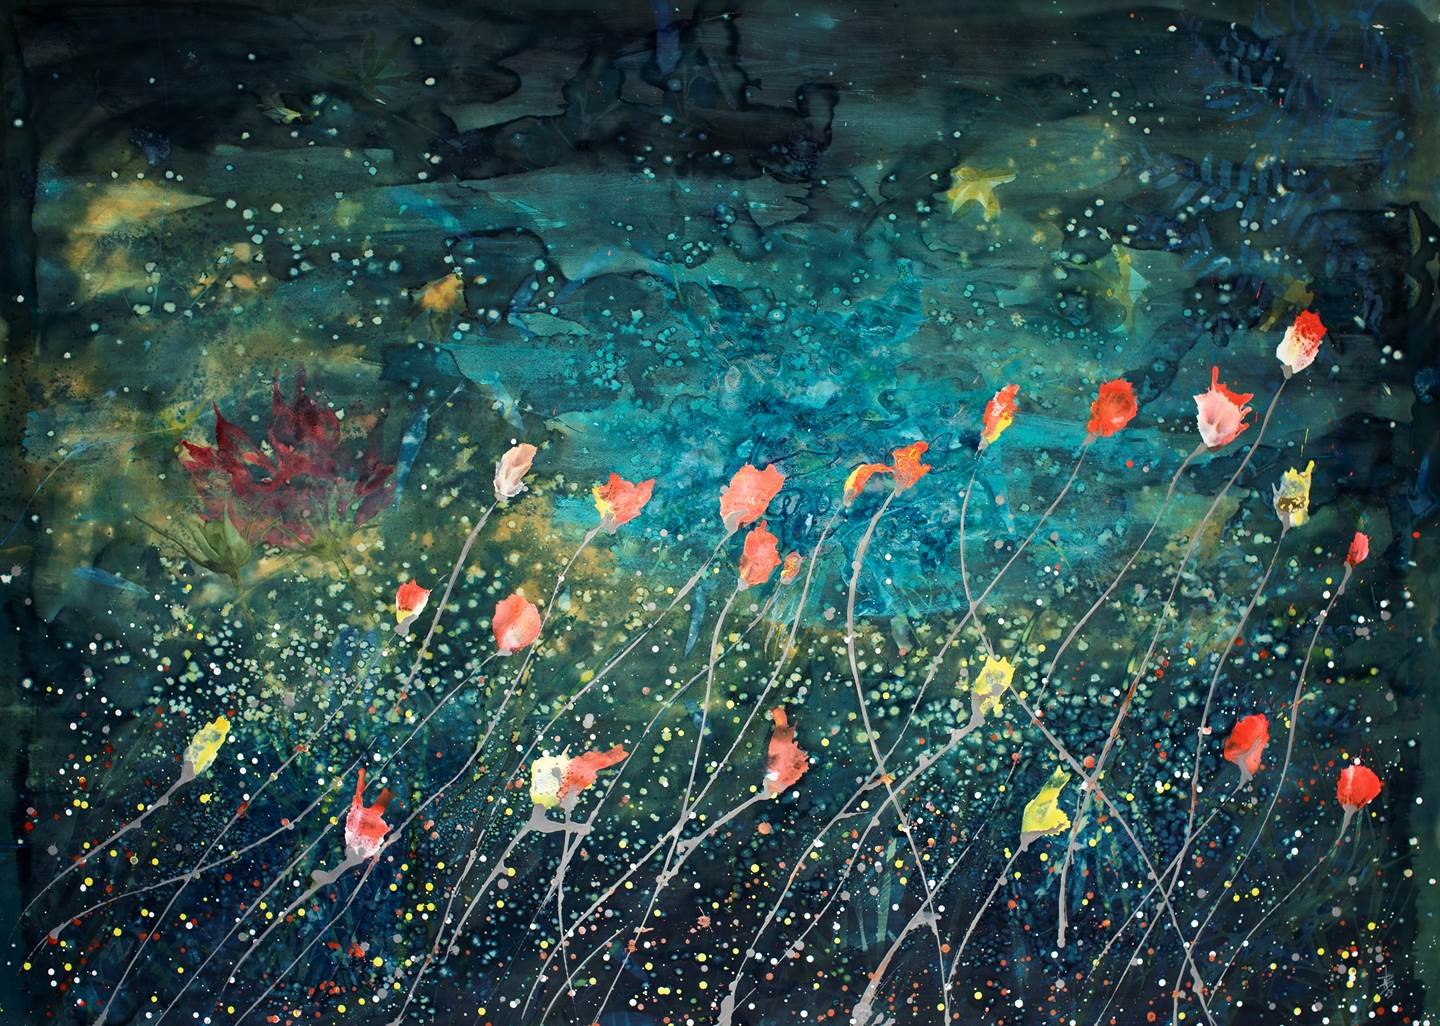 Flowers in the Sky, original Animals Mixed Technique Painting by Nogueira de Barros